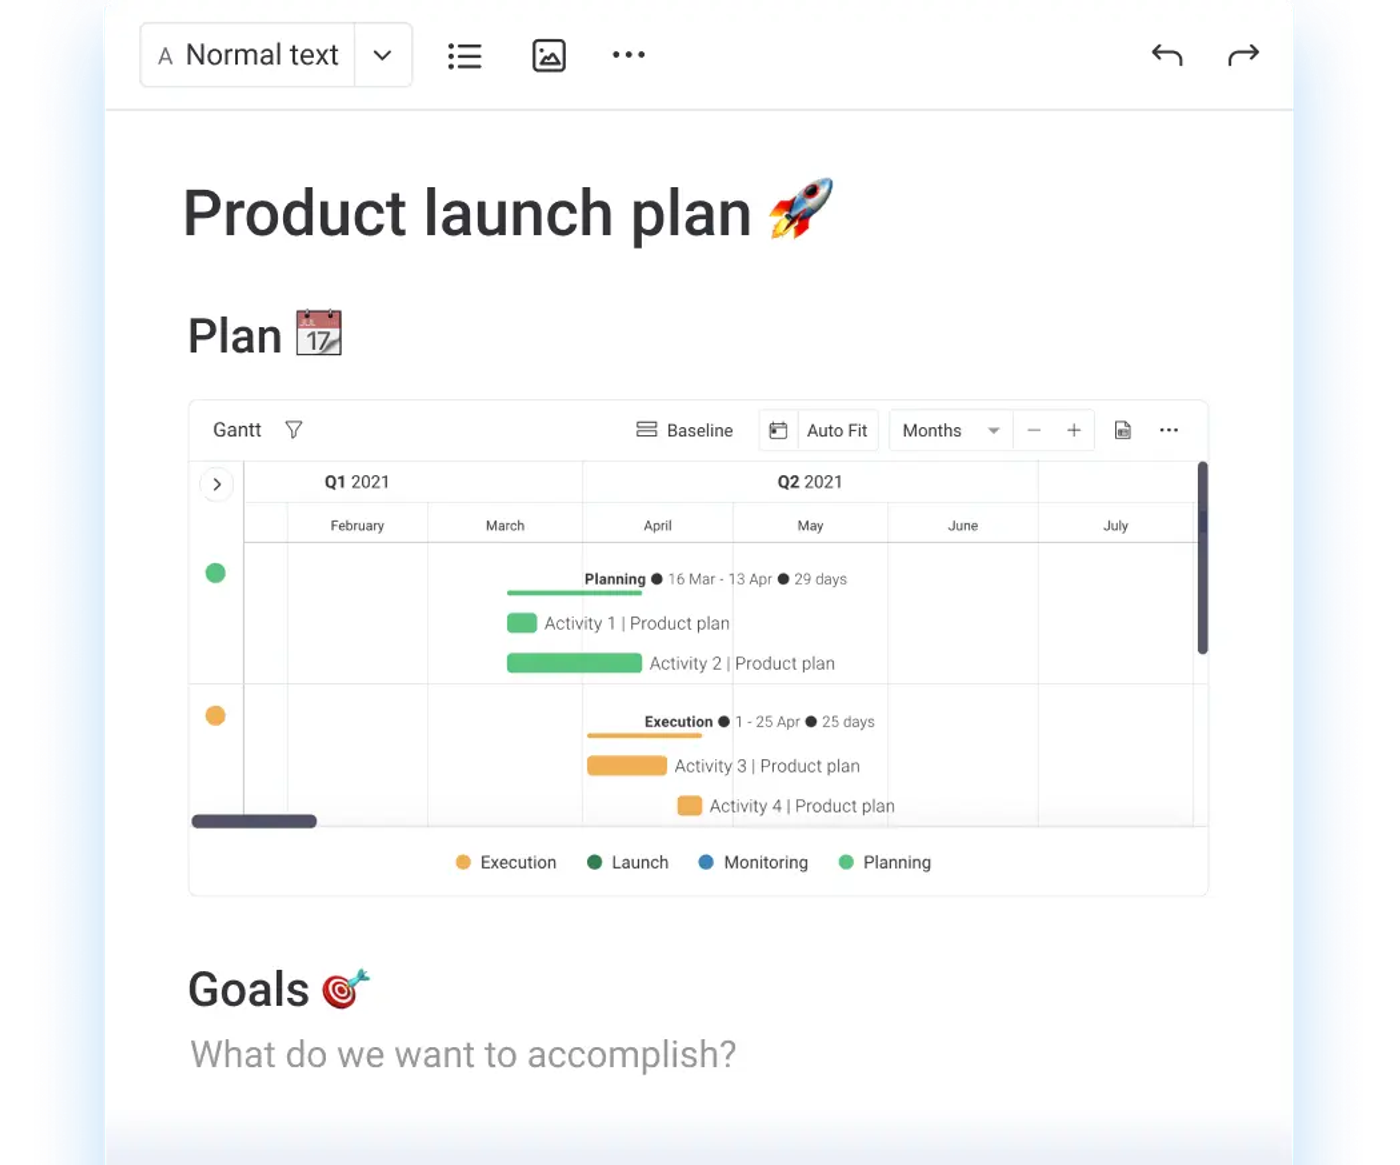 A monday workdoc for a product launch plan with a project timeline embedded